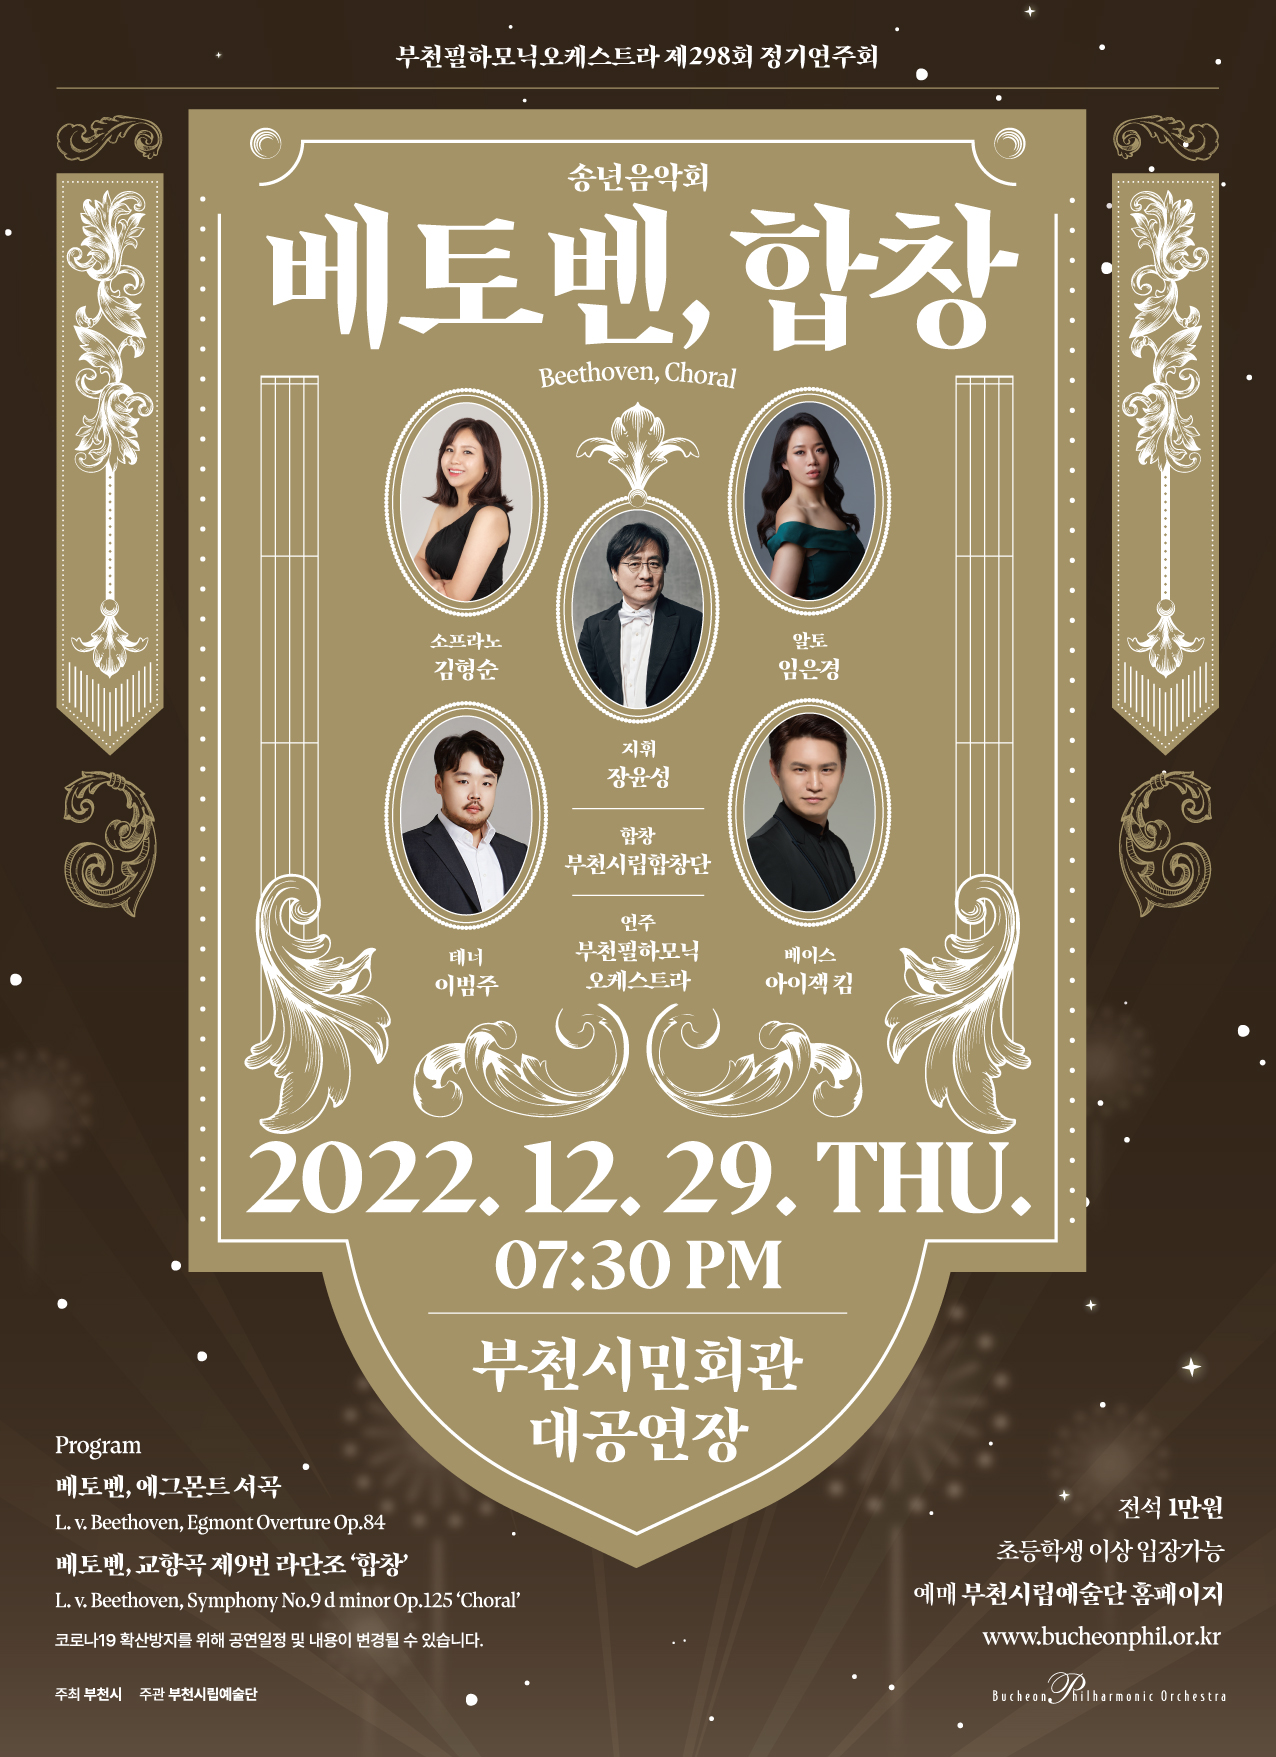 [12.29] Bucheon Philharmonic Orchestra 298th Subscription Concert - Farewell Concert 'Beethoven, Choral'